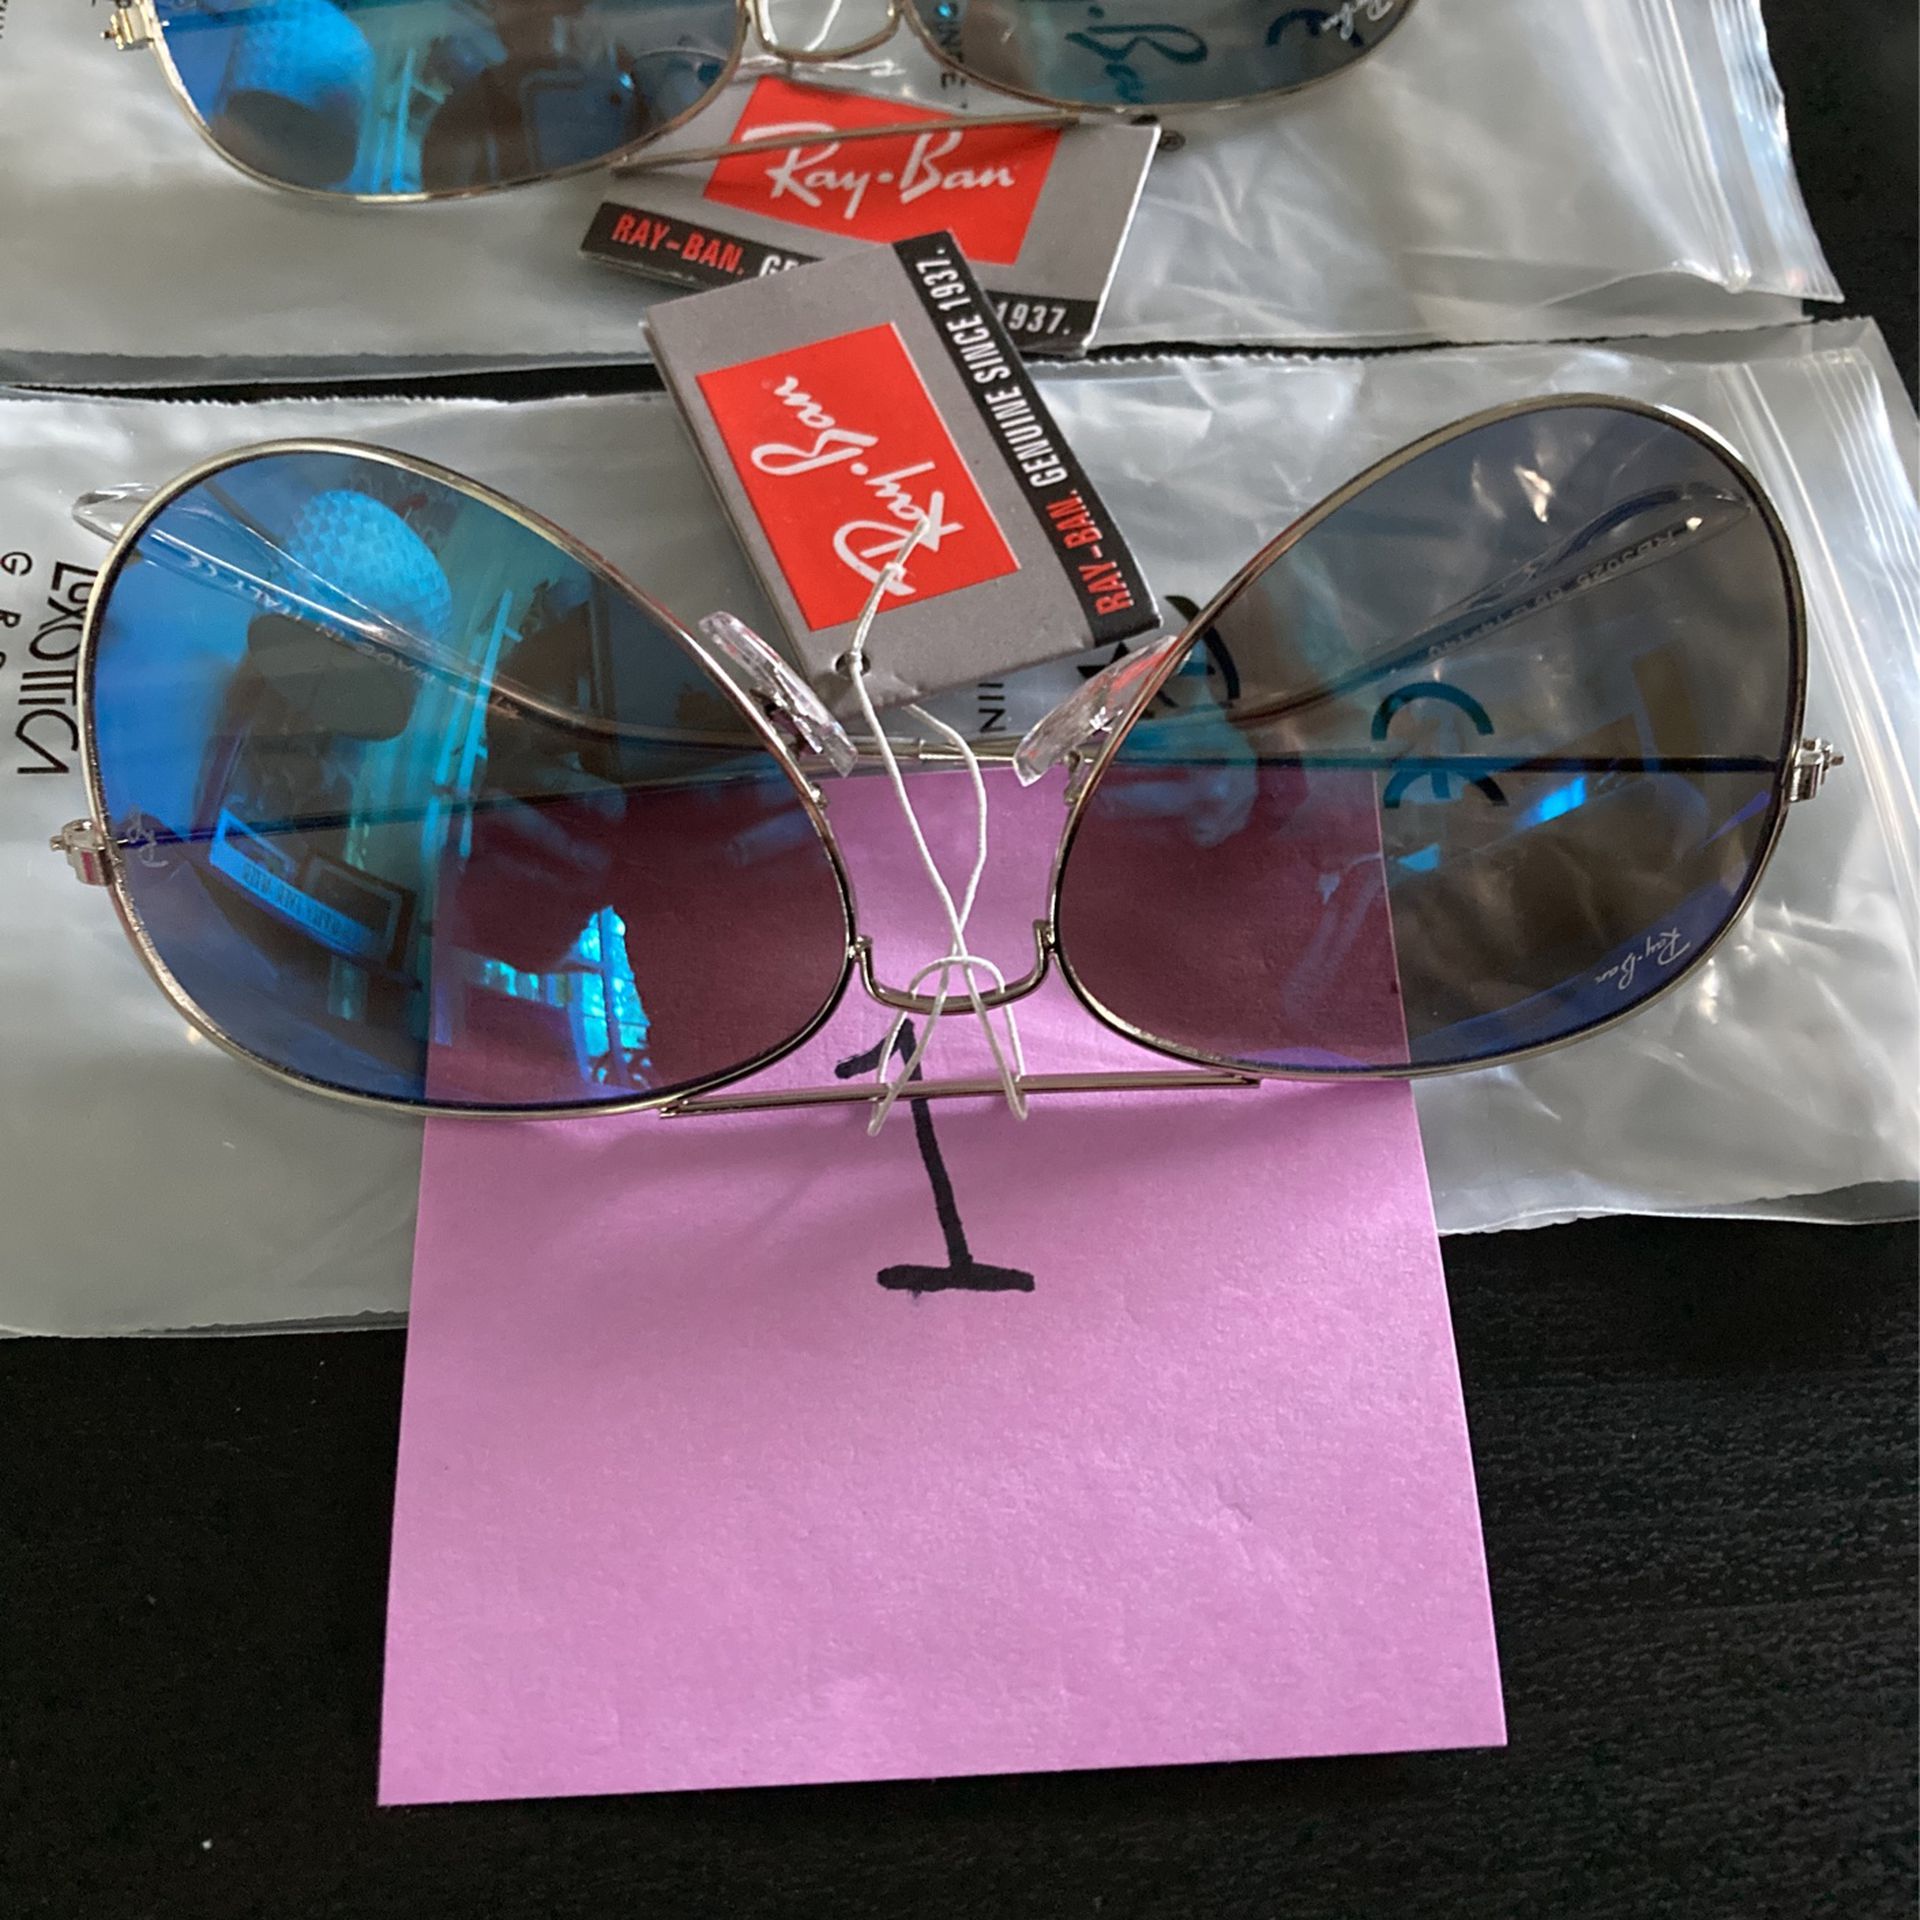 NWT Ray Ban Sunglasses / Women’s / Mirrored / Silver Frames / Gold Frames 